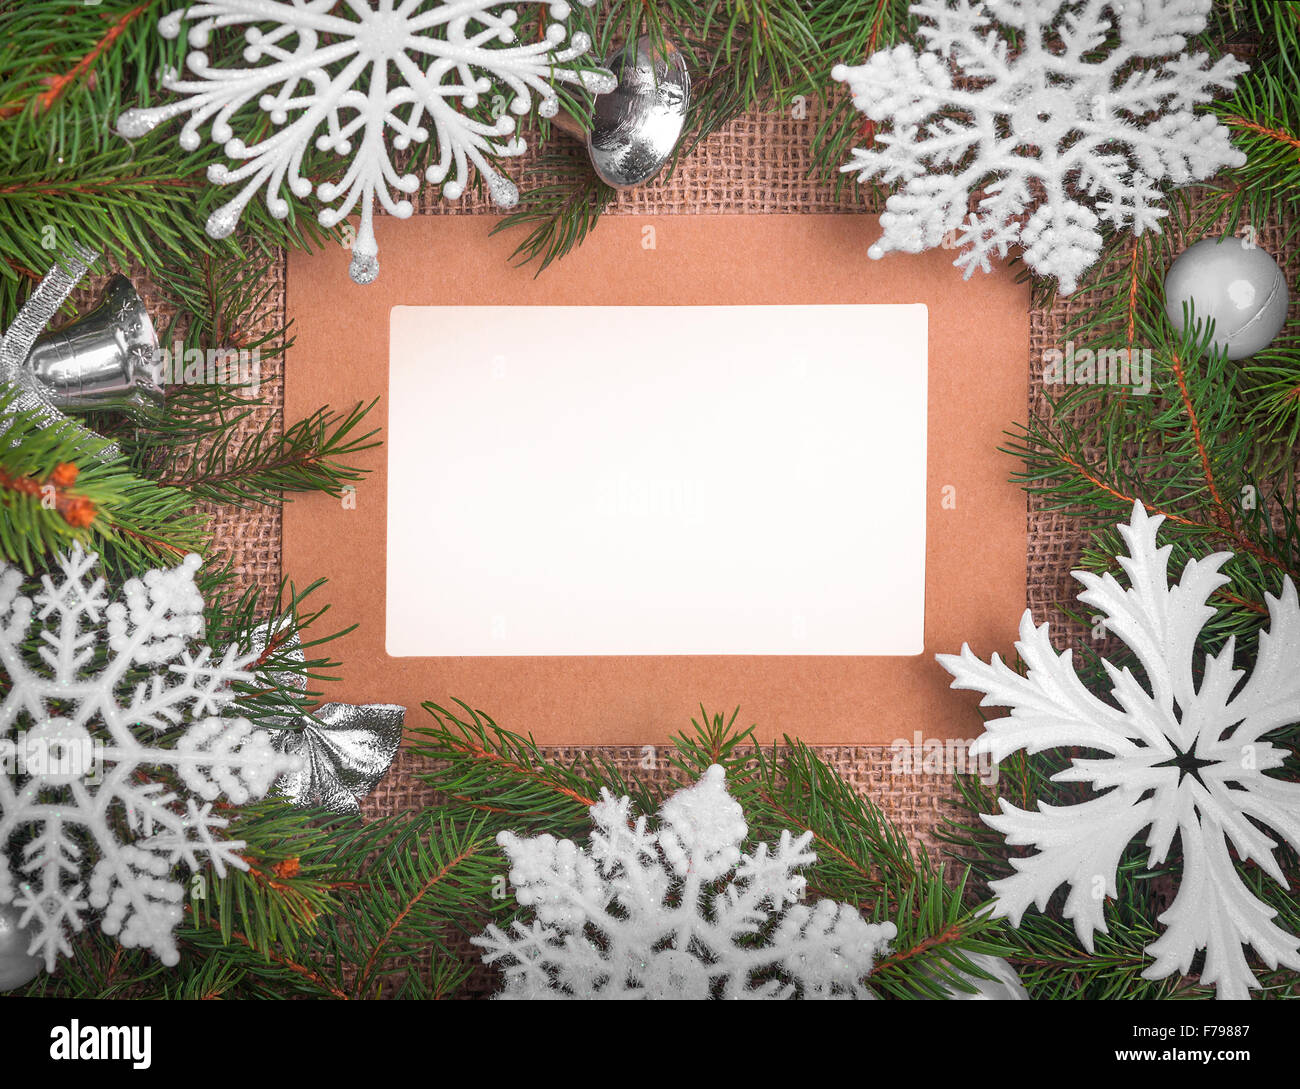 Christmas Frame to host your images. Stock Photo